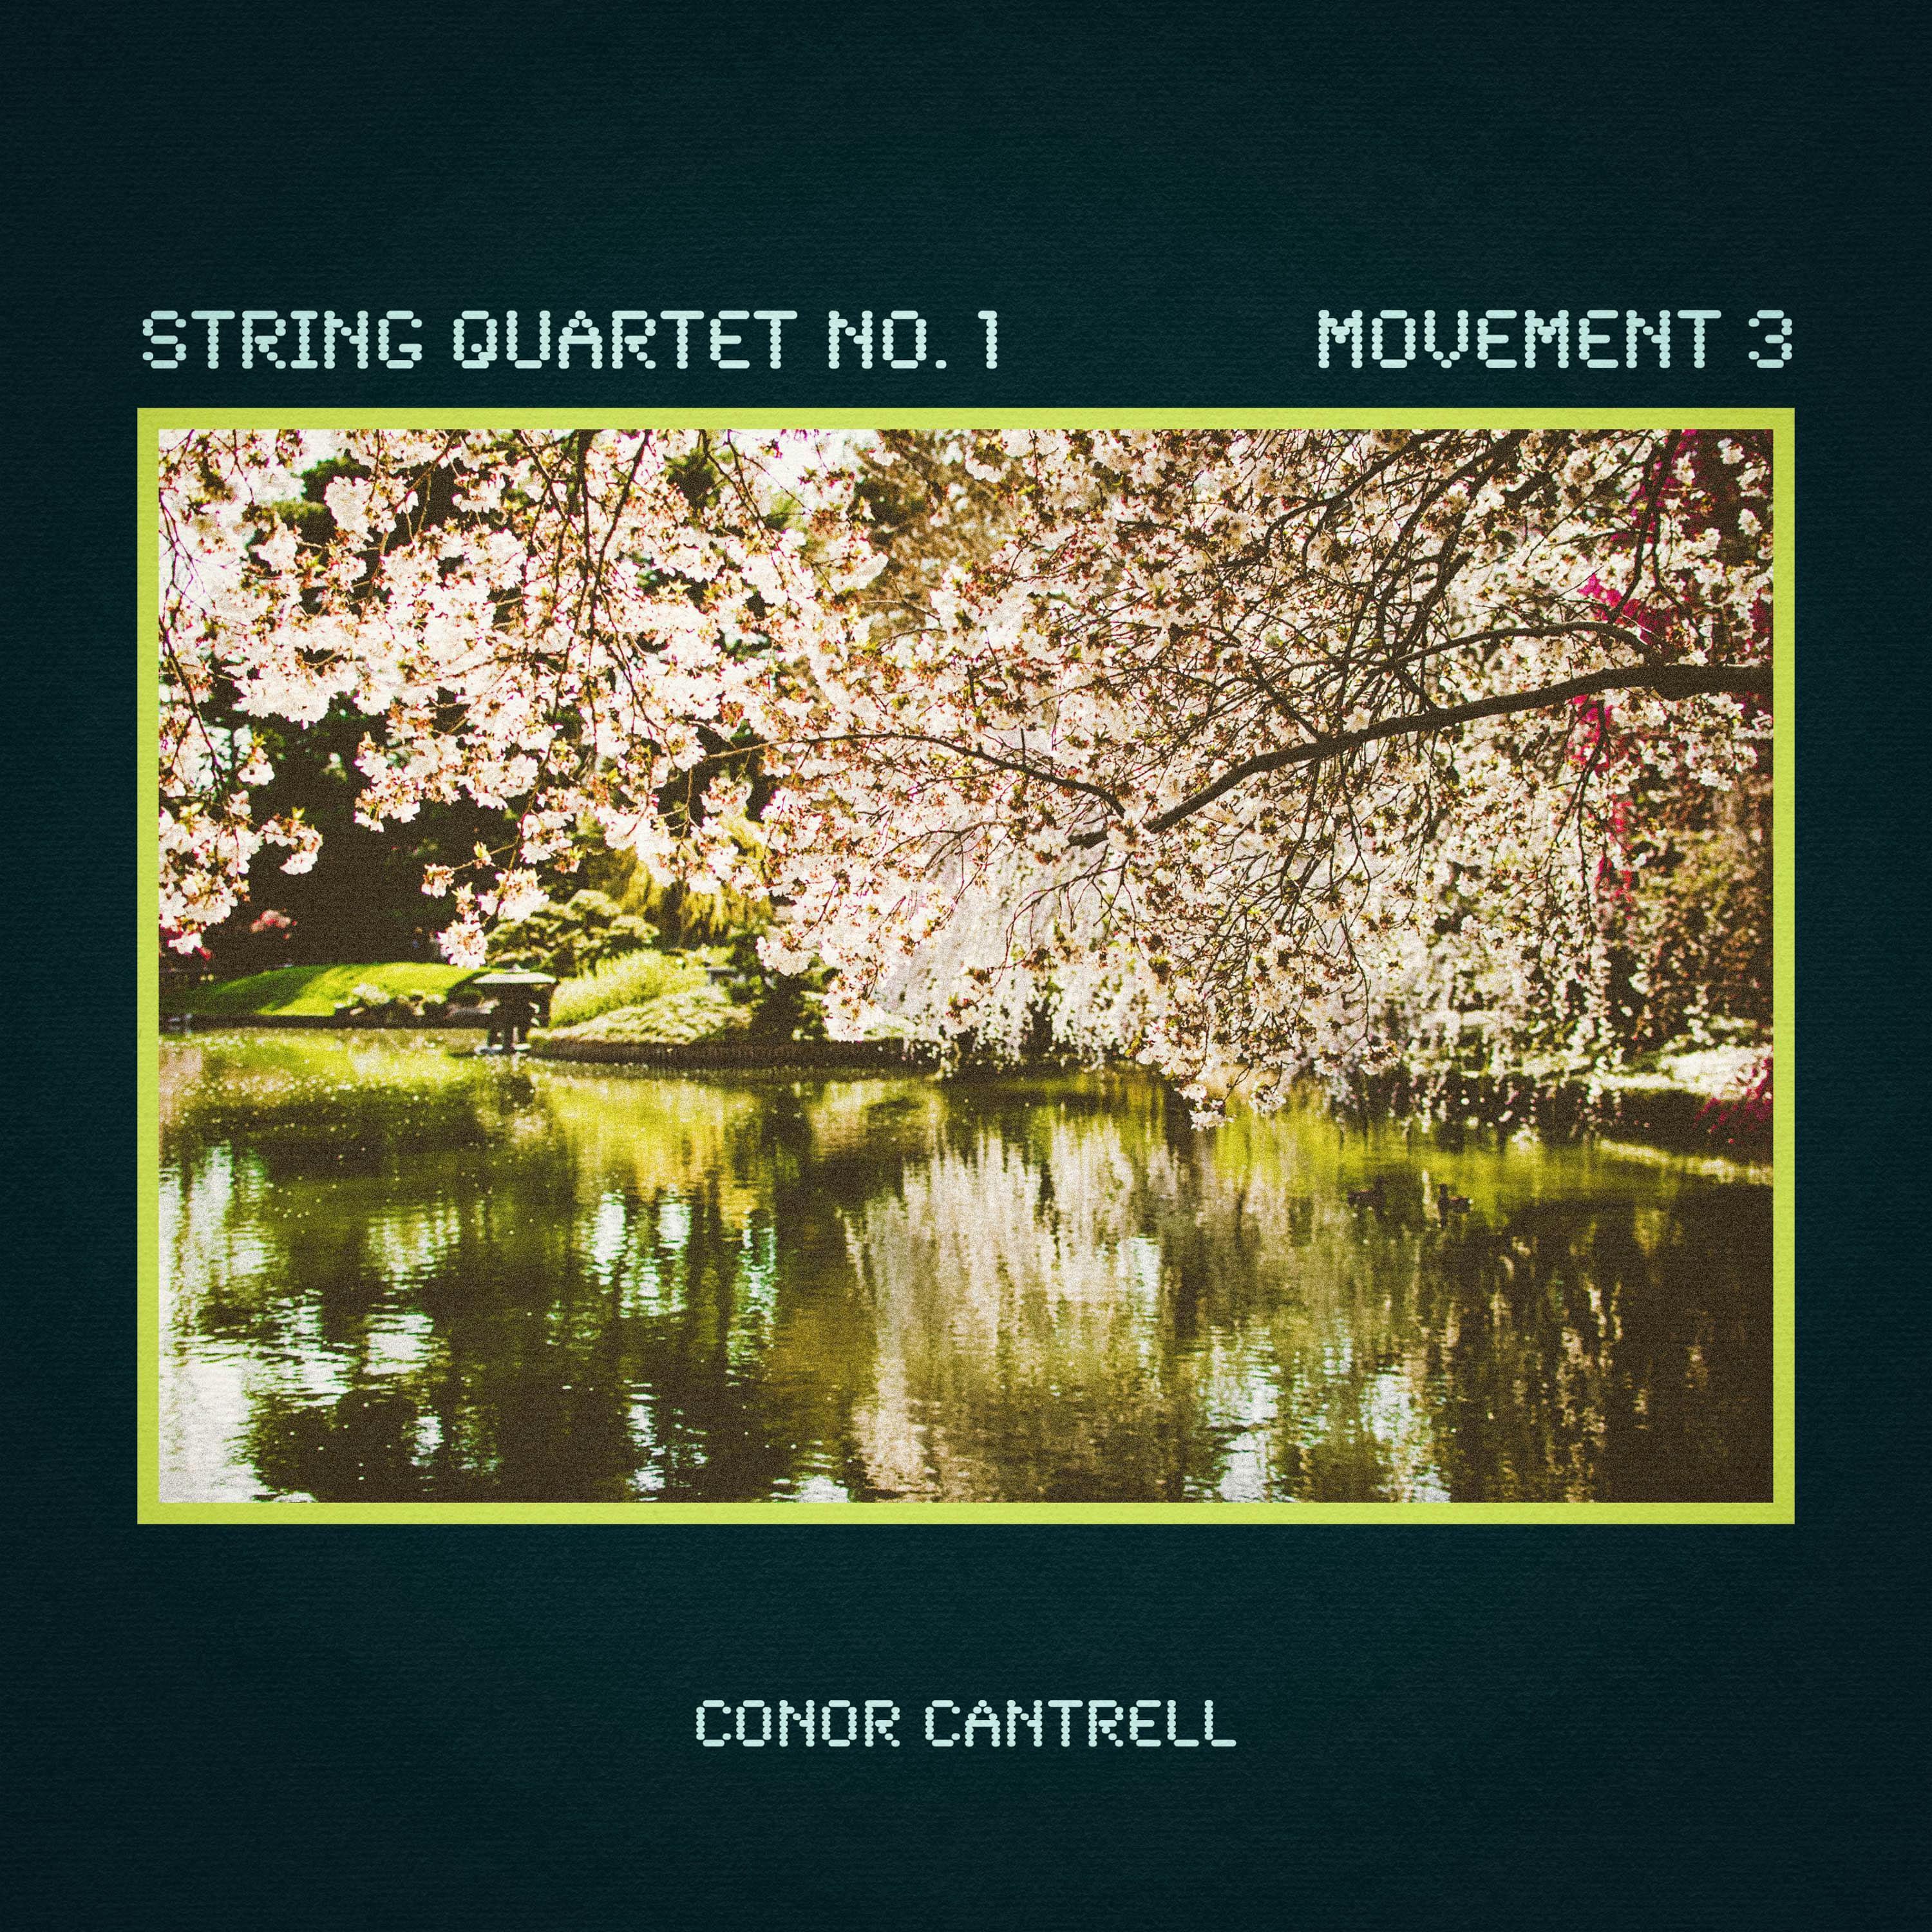 Cover art for String Quartet No. 1, Movement 3 by Conor Cantrell